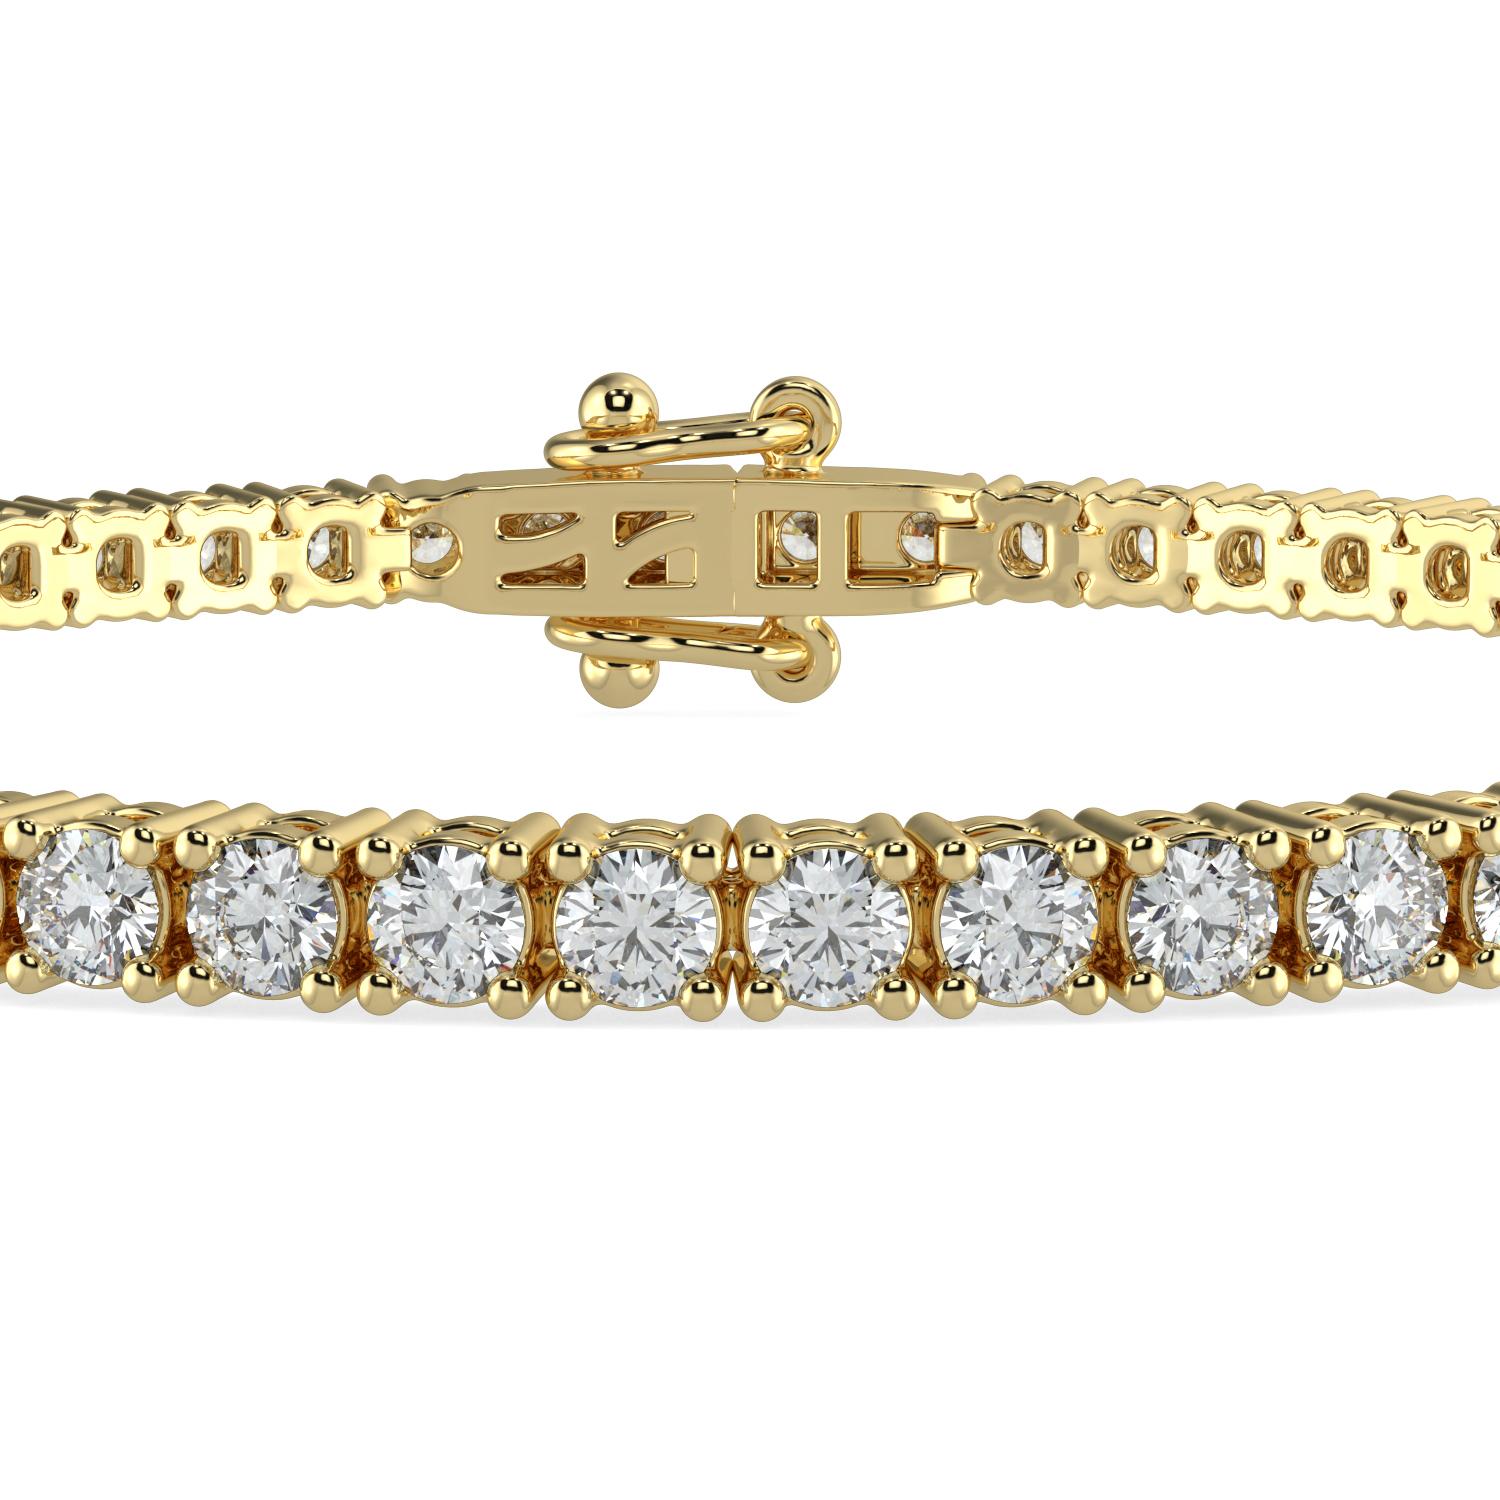 12.00 Carat Round Cut GH-SI Natural Diamond Classic Tennis Bracelet 4 Prong 14K Yellow Gold for Women

Specification
Brand: AAMIAA
Length: 7 Inches 
Color: GH
Carat Weight:12.00CTW
Clarity: SI

LUXURIOUS AND LASTING- Our bracelets are a luxurious